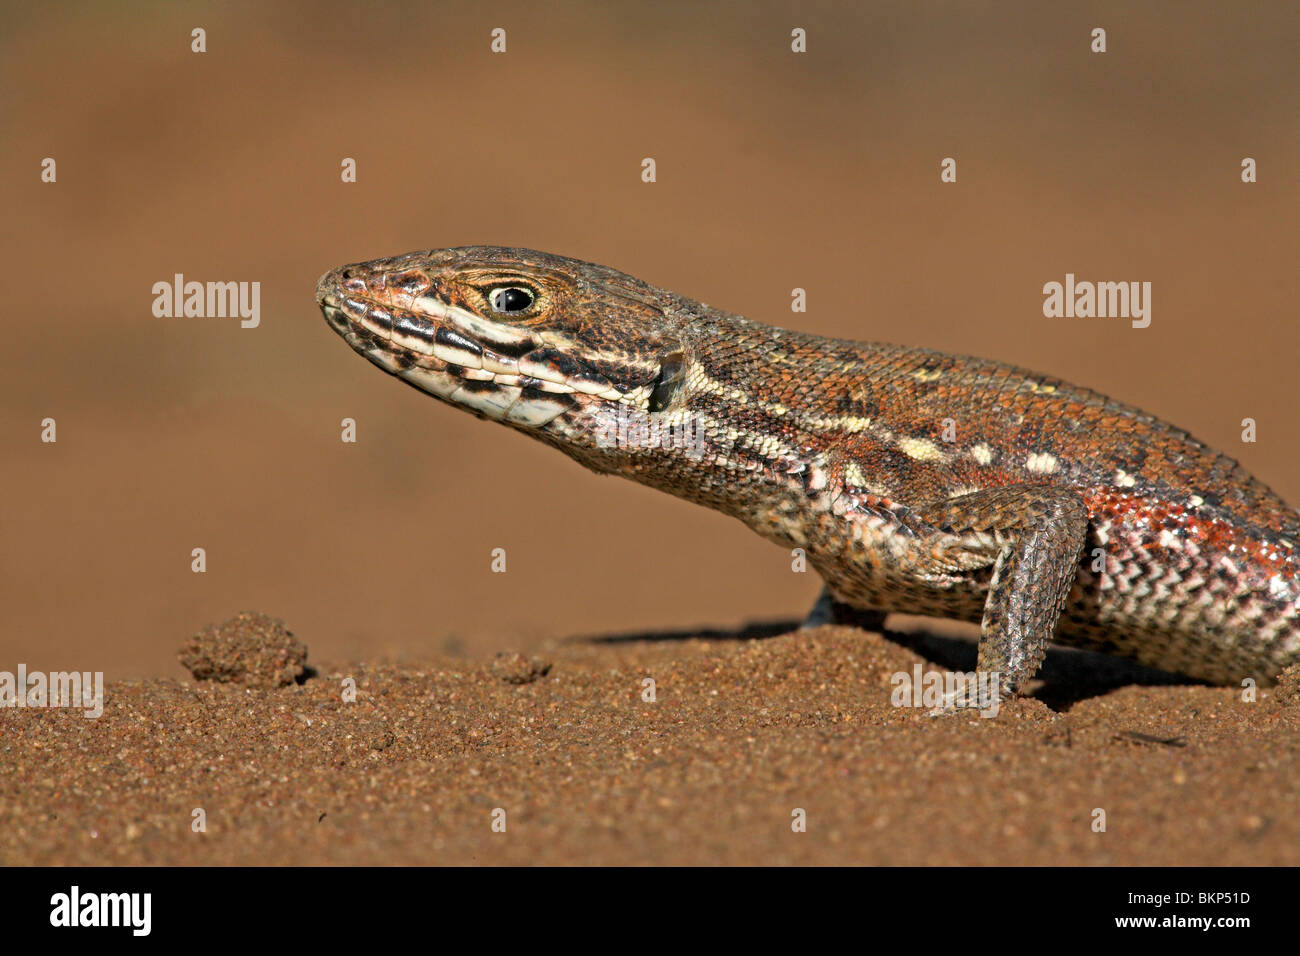 portrait of the extremely fast common rough-scaled lizard on sand Stock Photo